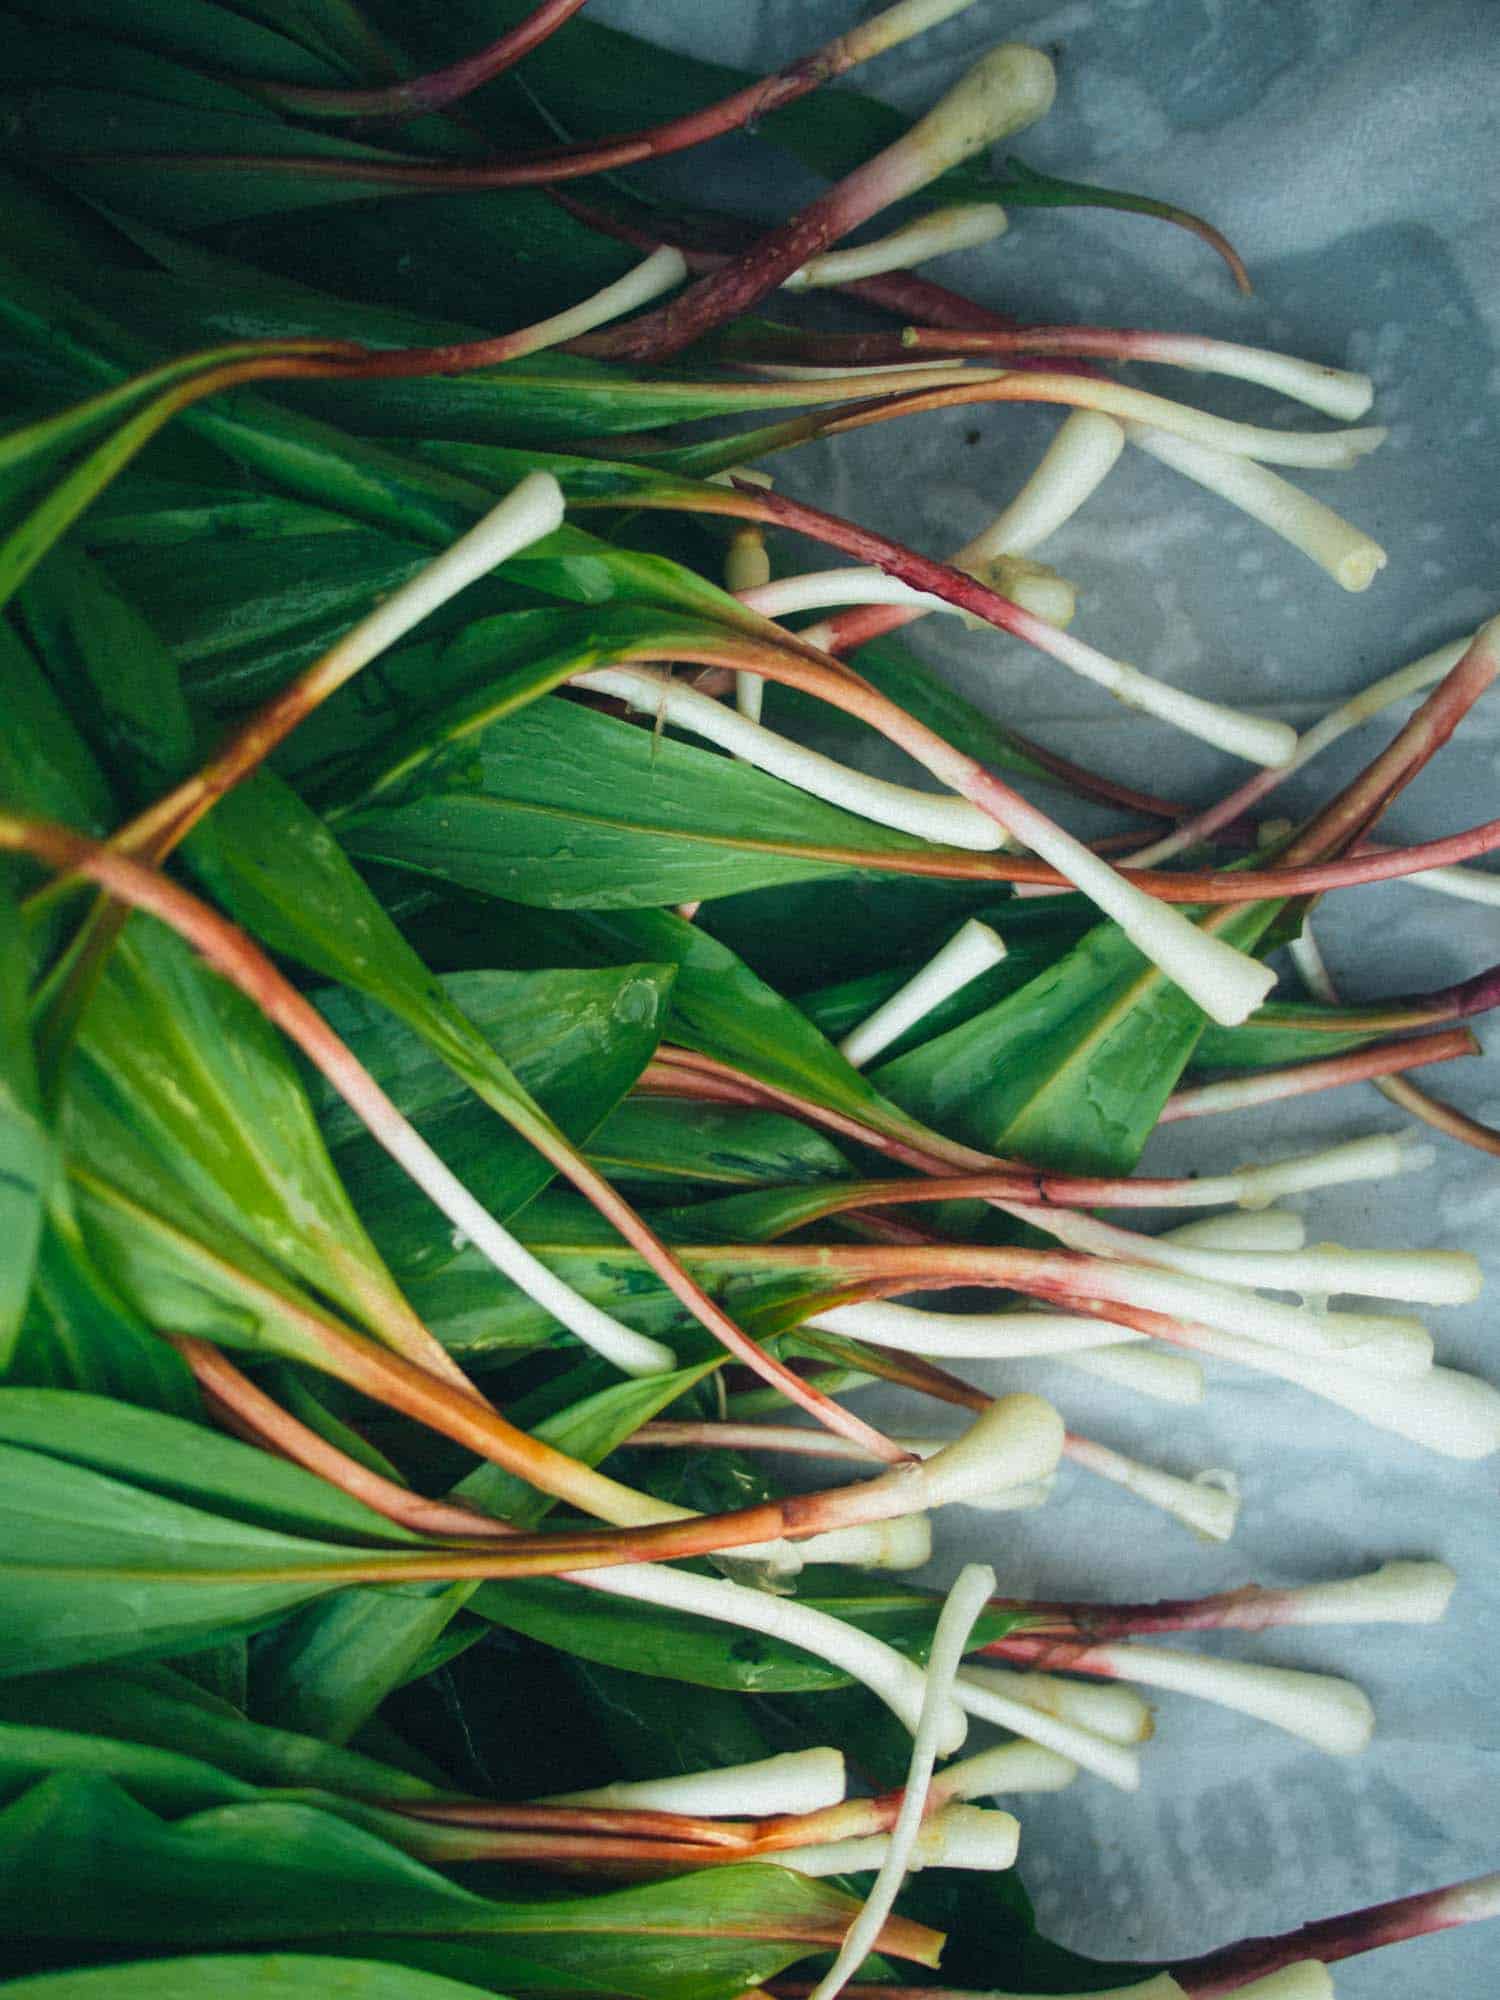 Diced ramps are easy to make and you can keep the flavor of wild leeks all year round.